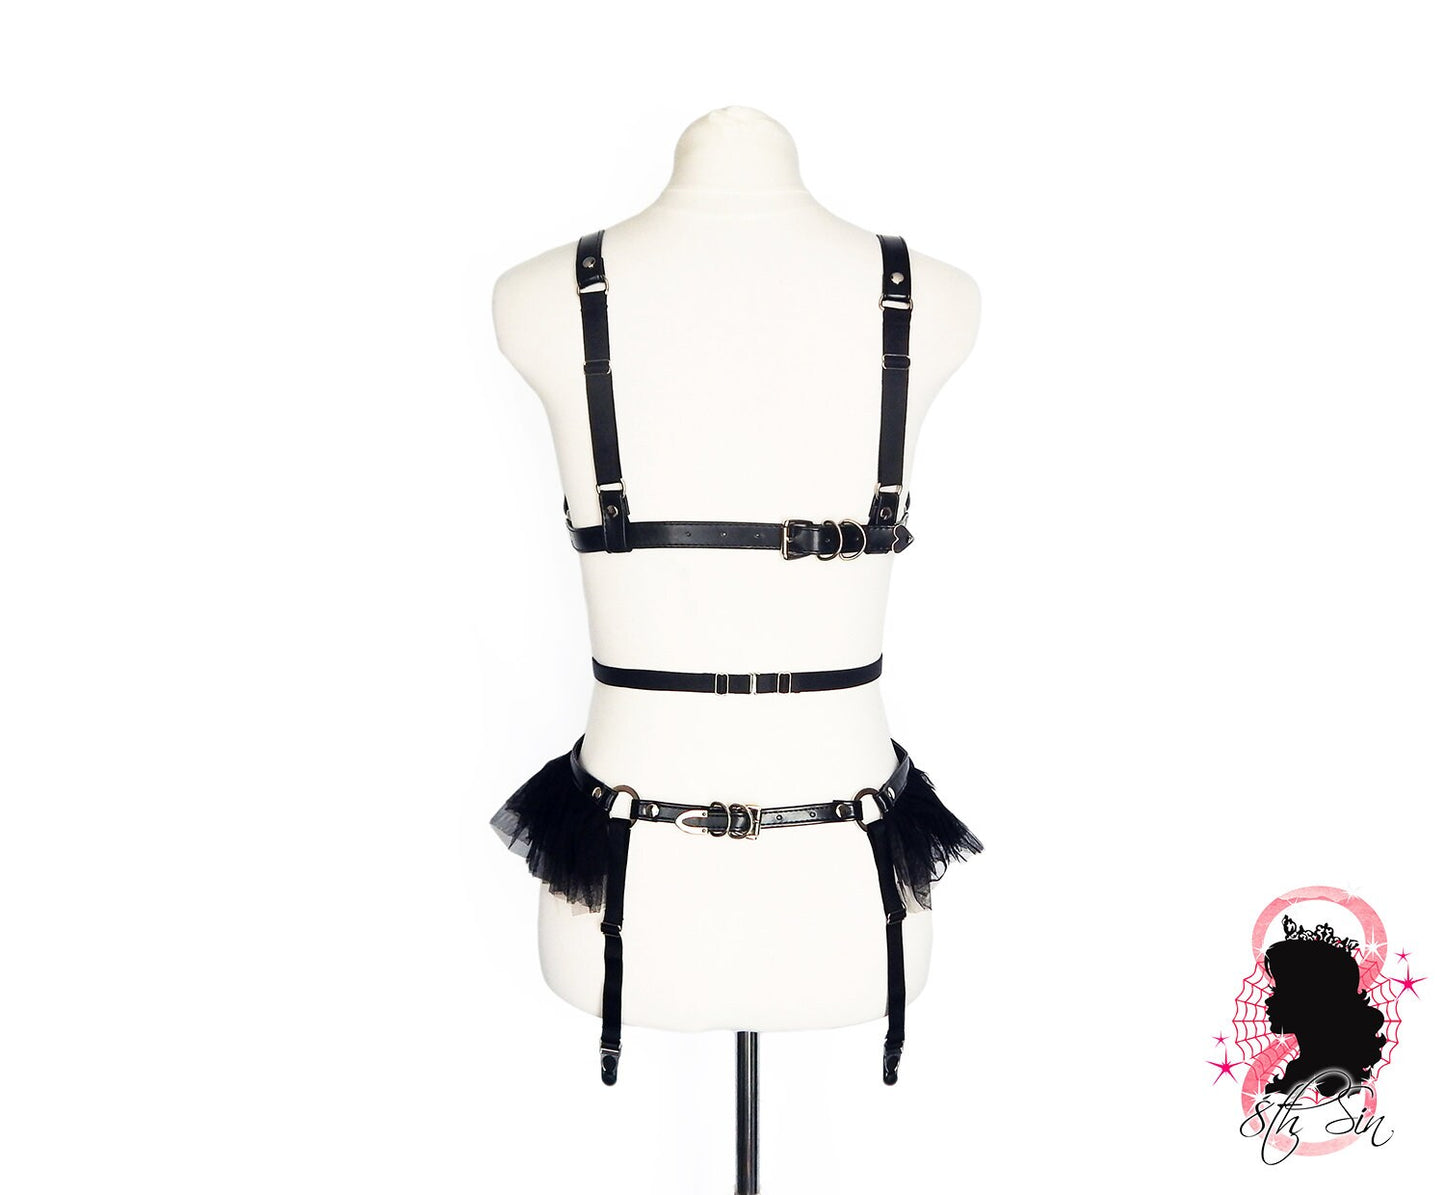 Black Vegan Leather Cage and Corset Harness Set